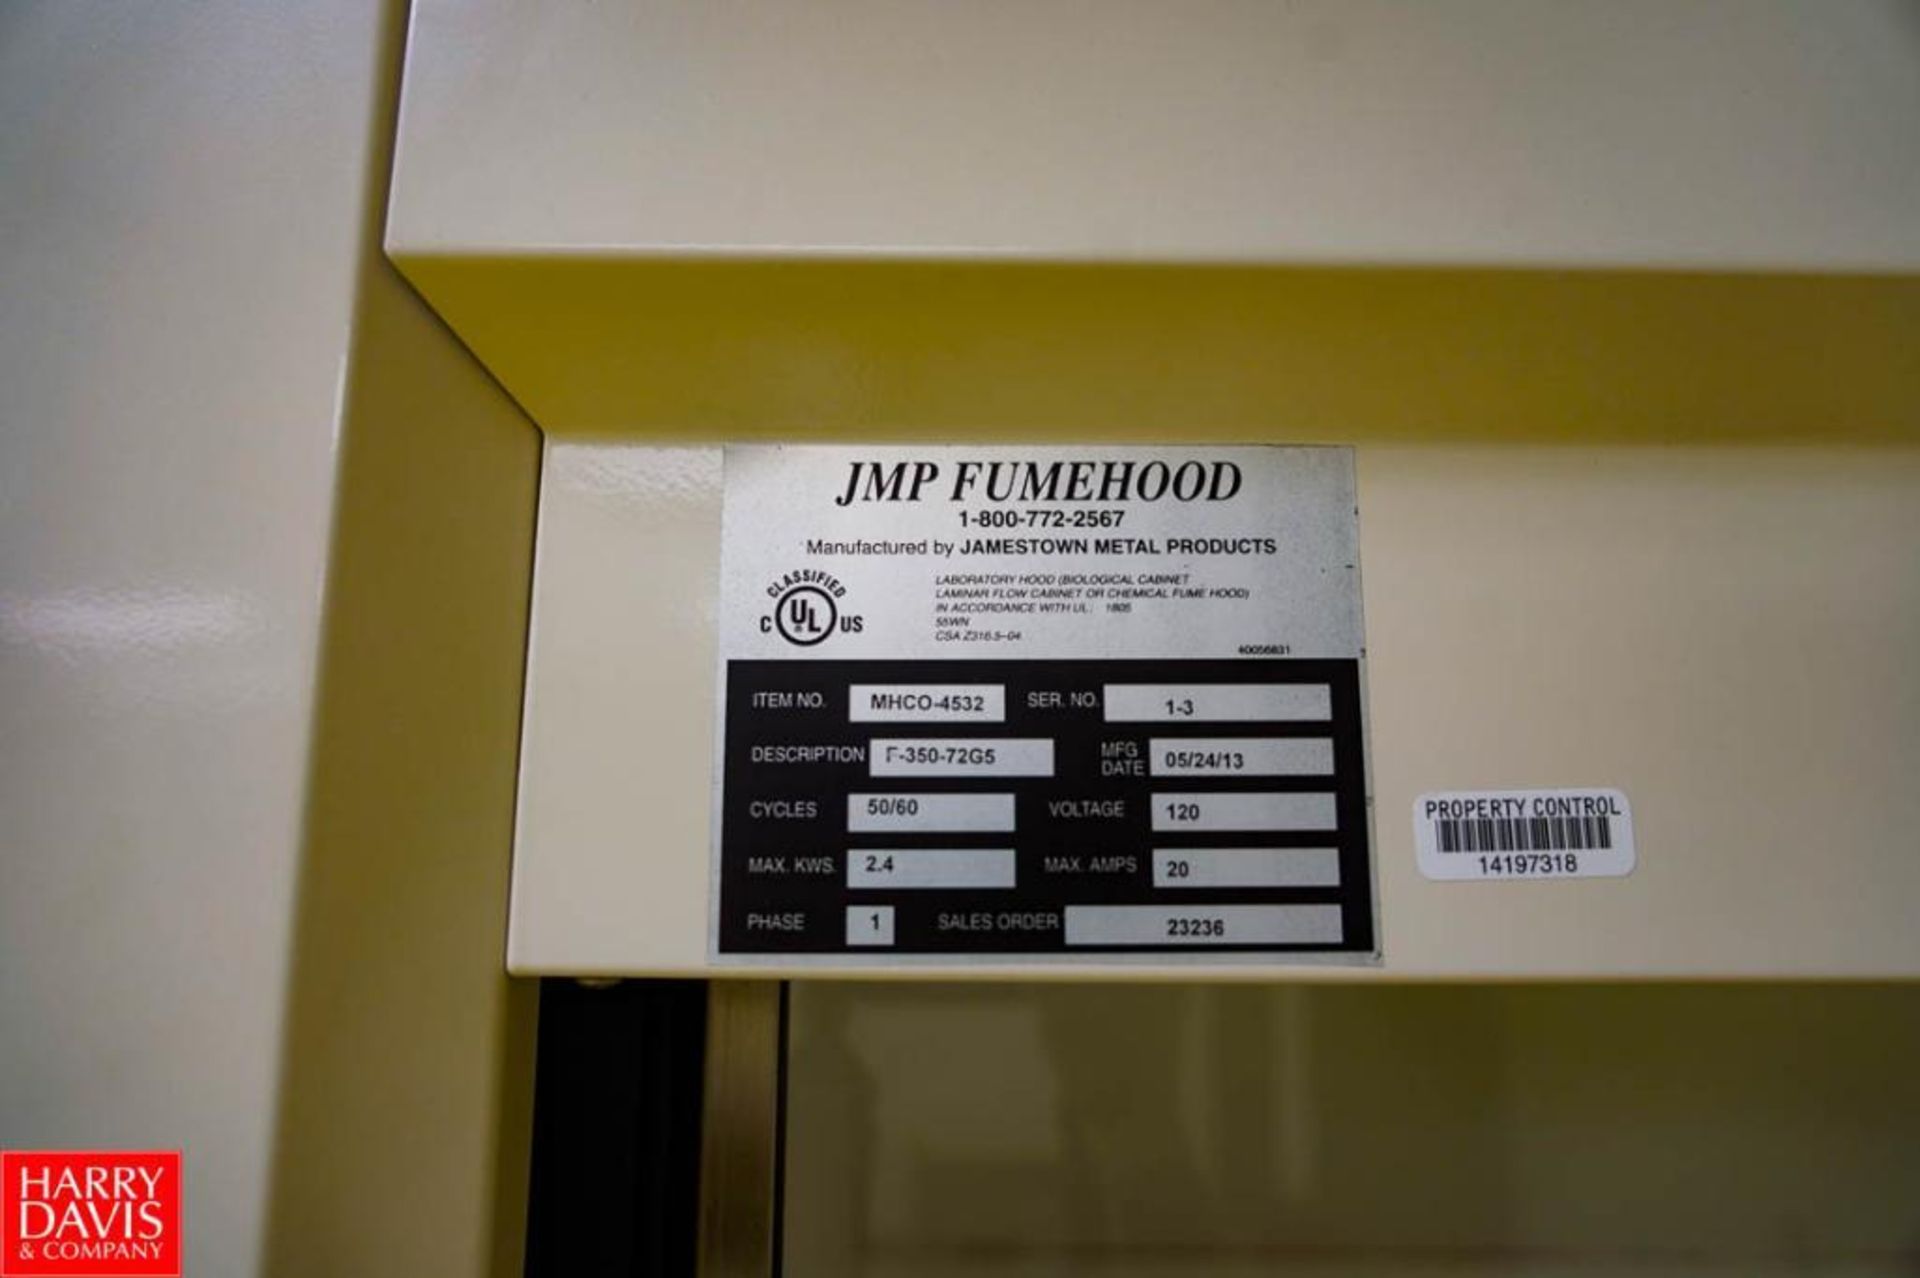 JMP Fume Hood 33'' x 73'' x 93'' Tall, 120 Volts, 50/60 Hz, 20 Amps, 2.4 Max KWS, Single Phase, Mode - Image 2 of 3